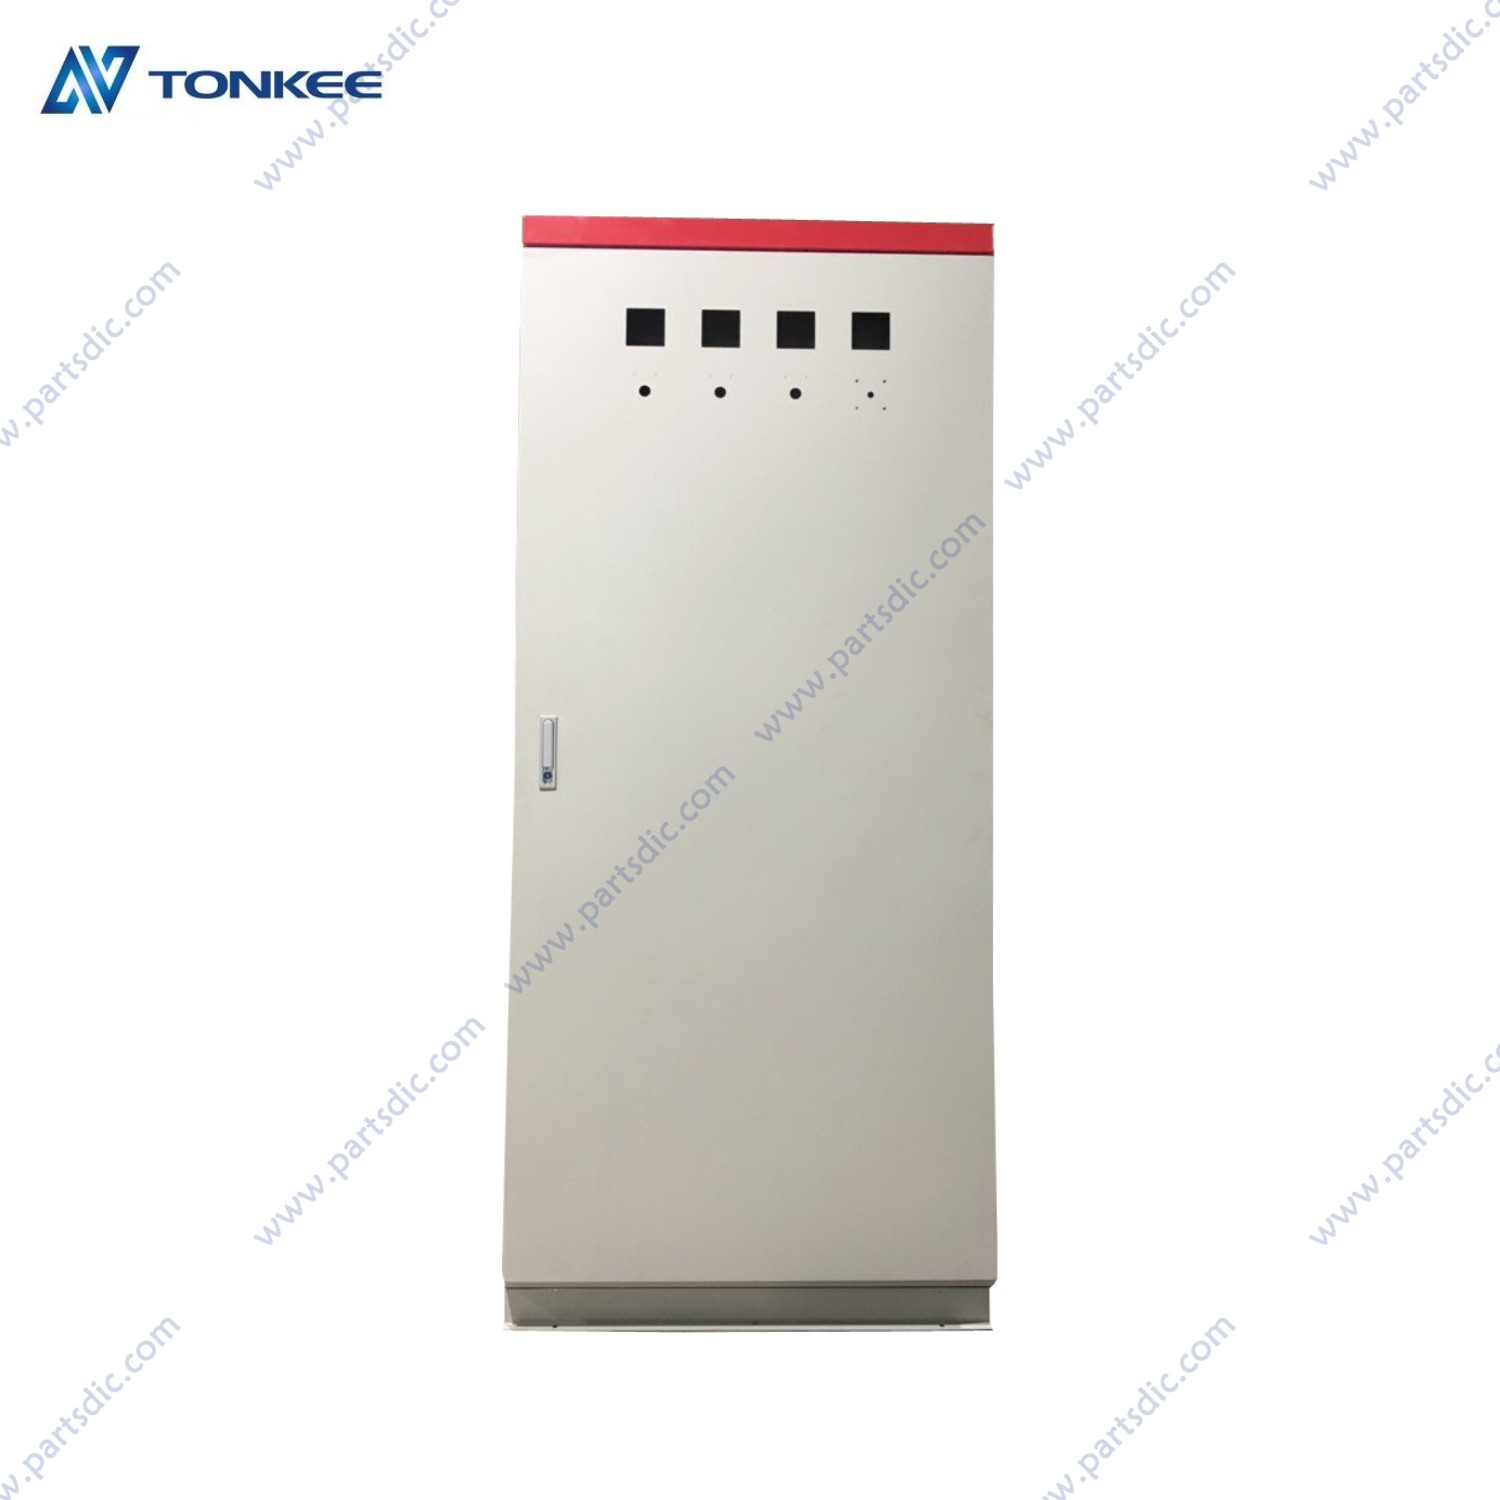 XL-21 Power Distribution Cabinet Electrical control switchboard panel board XL-21 Series 3 phase Low Voltage power swithgear Box